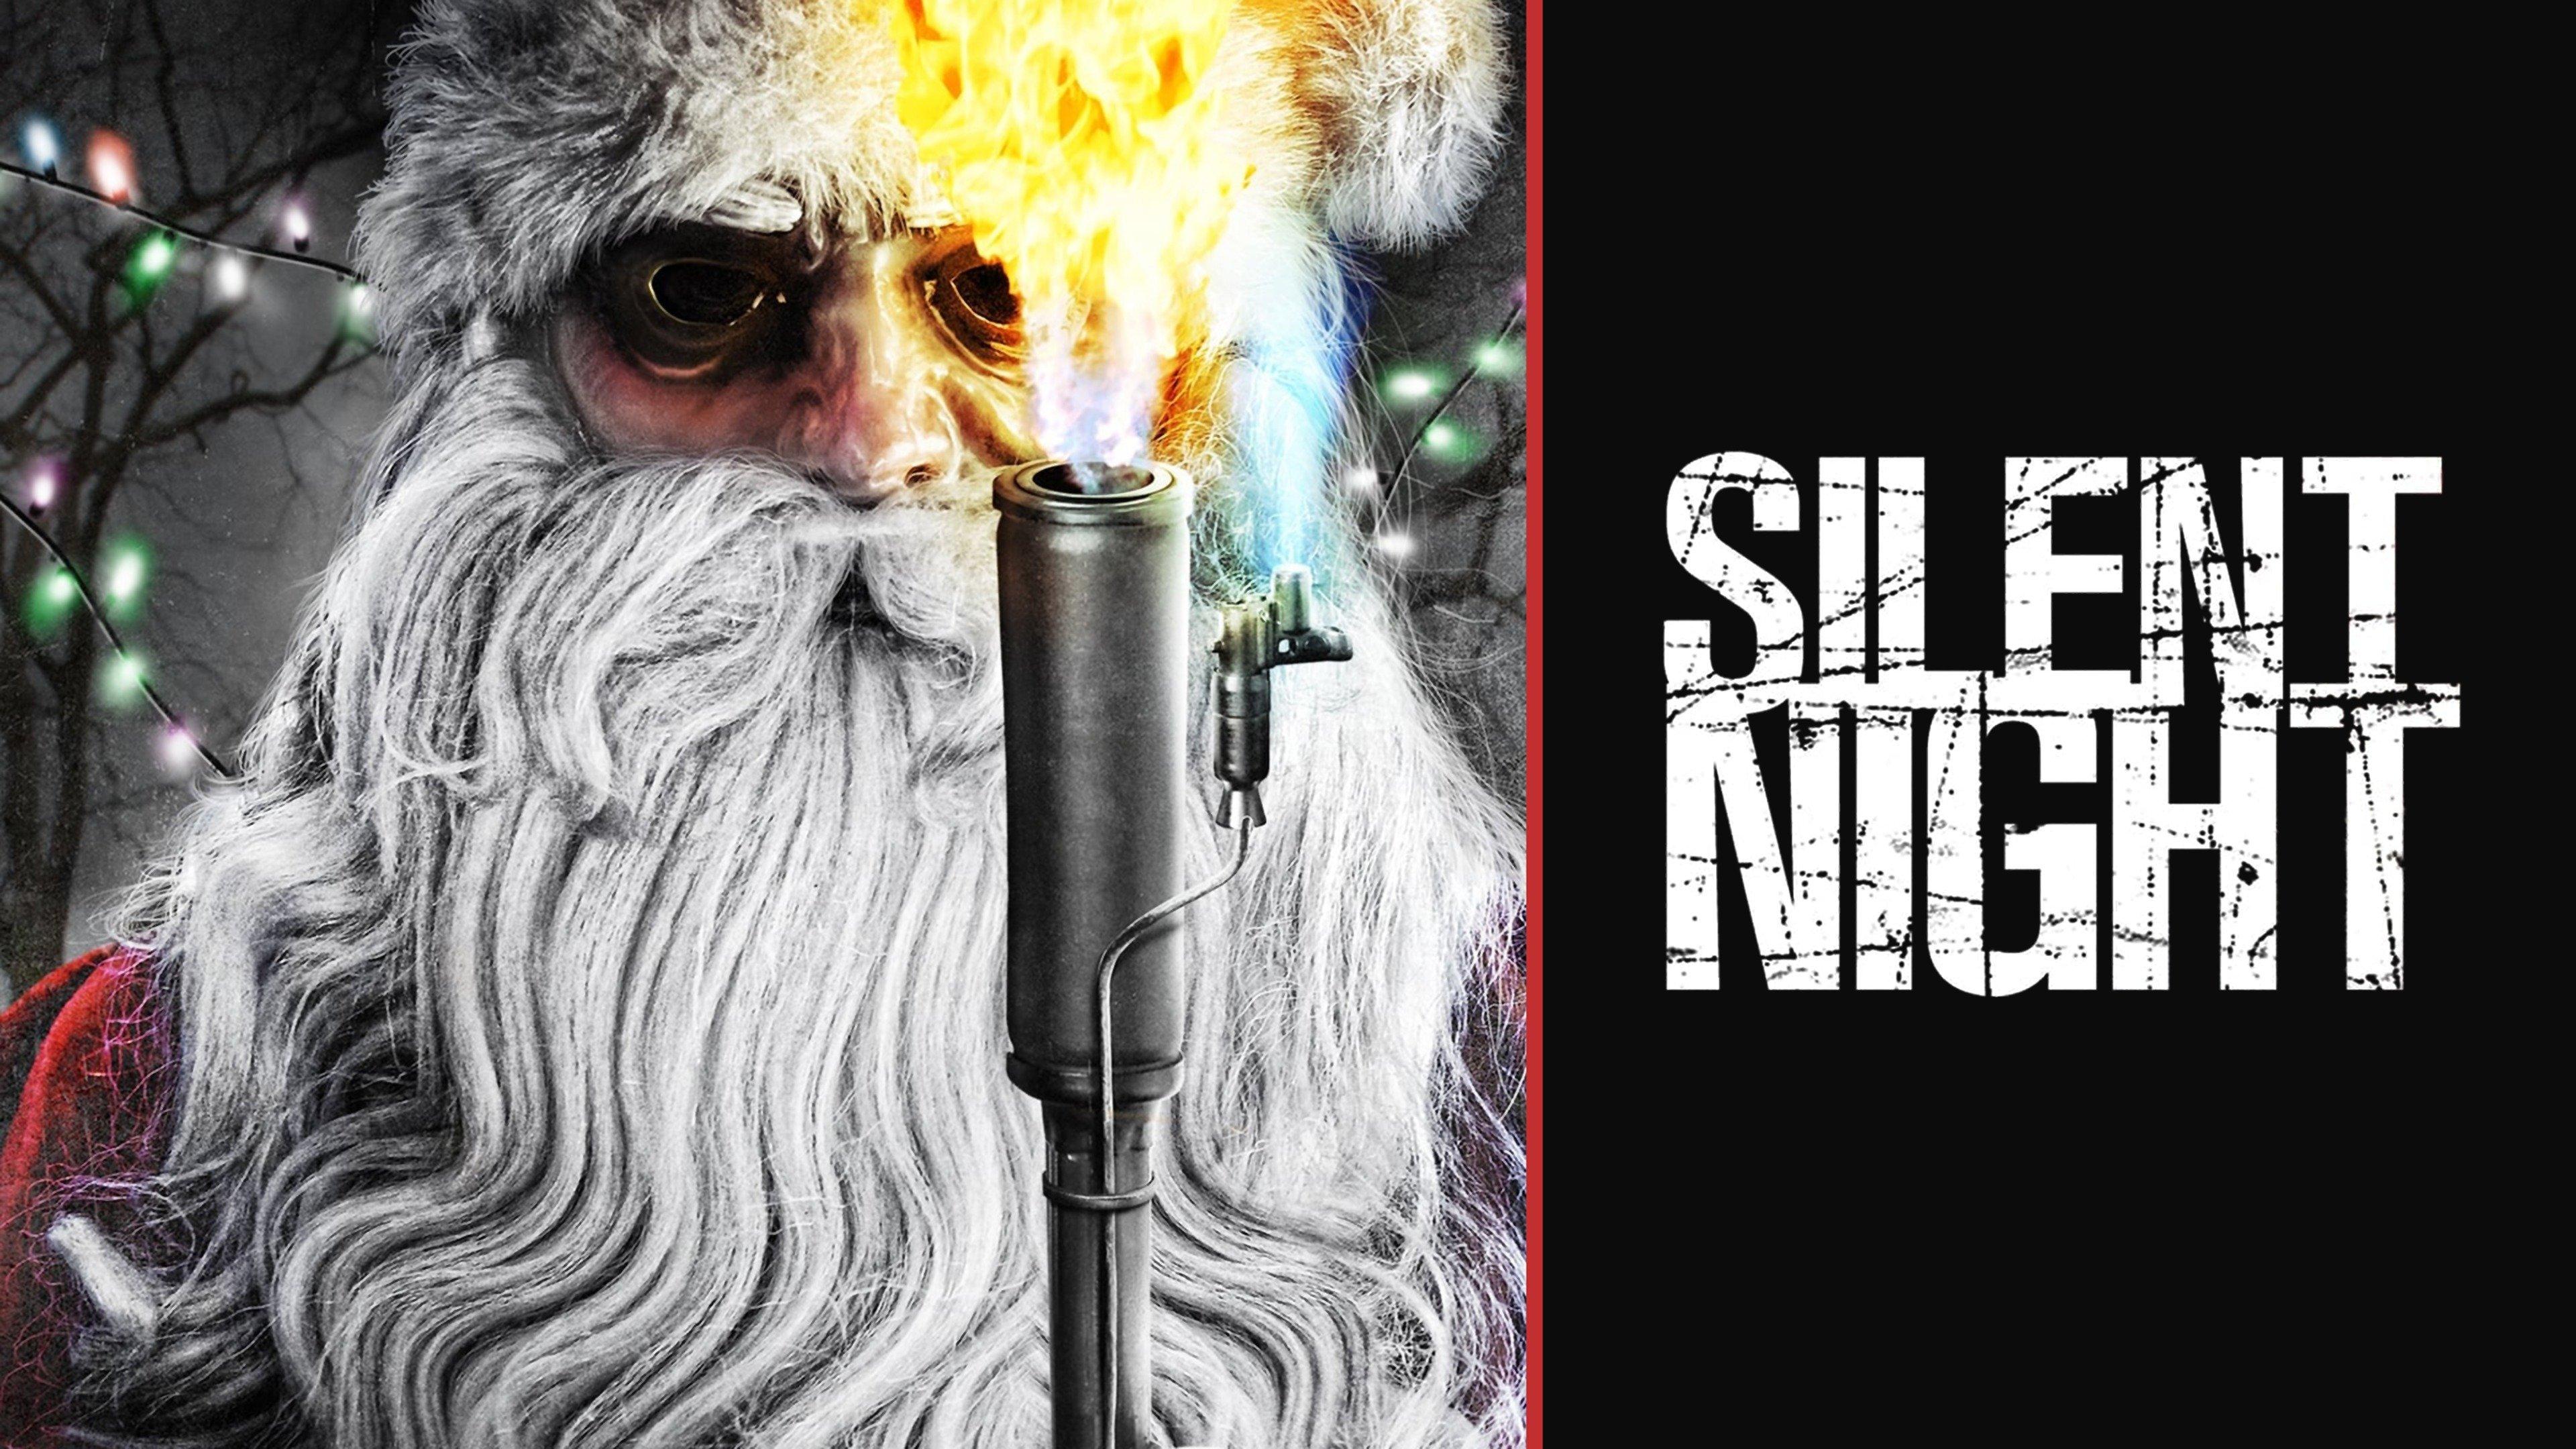 Watch Silent Night Streaming Online on Philo (Free Trial)